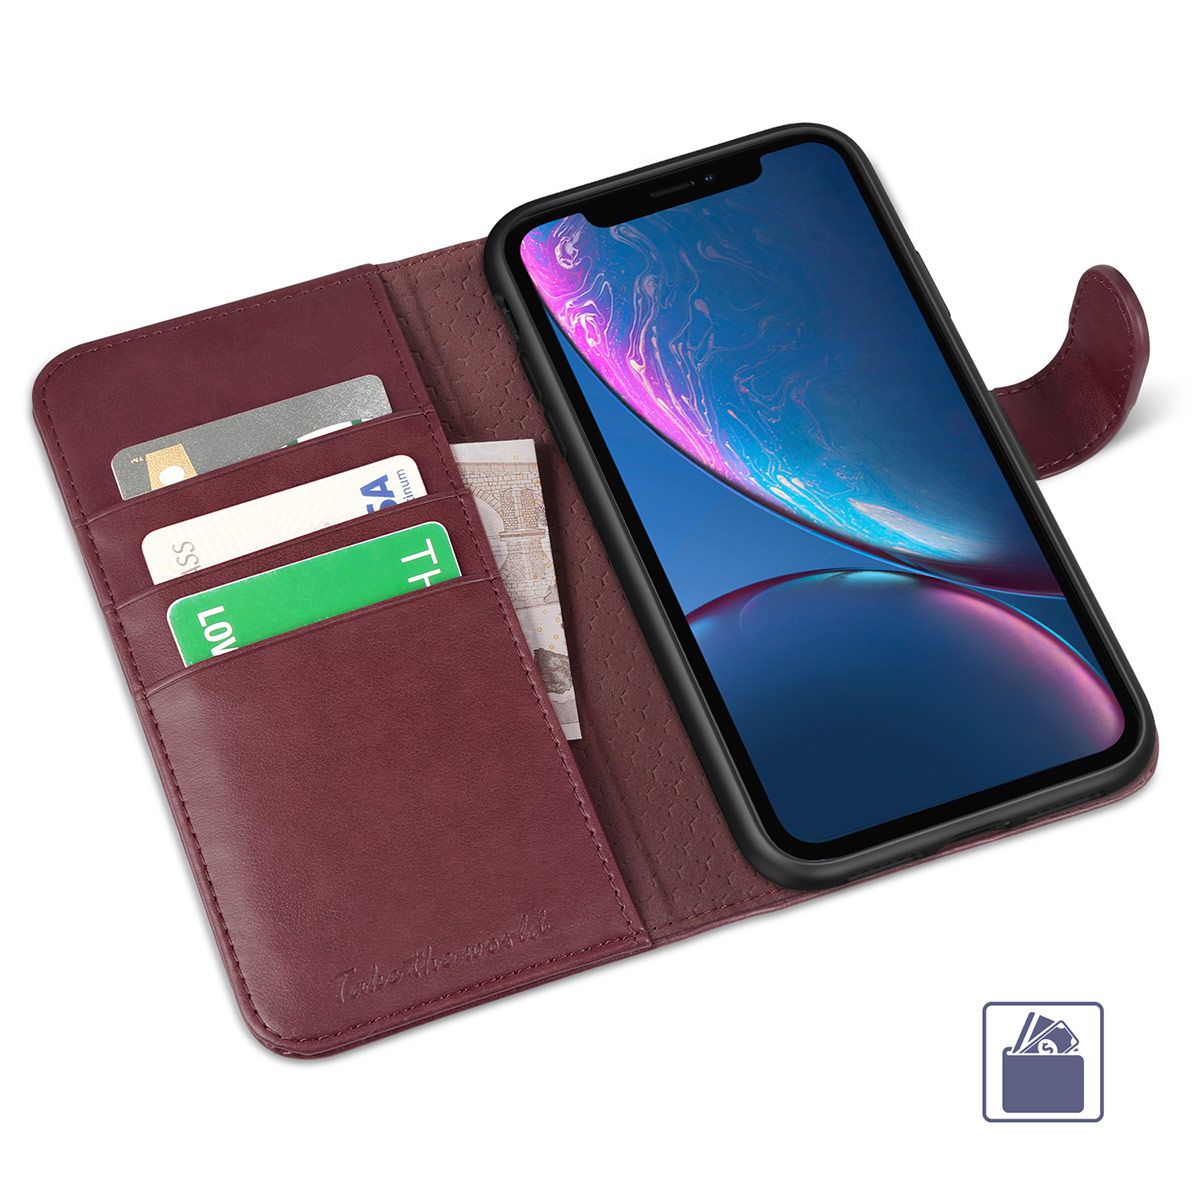 Tucch Iphone 11 Pro Max Wallet Case Iphone 11 Pro Max Leather Case Folio Flip Cover With Rfid Blocking Stand Credit Card Slots Magnetic Closure